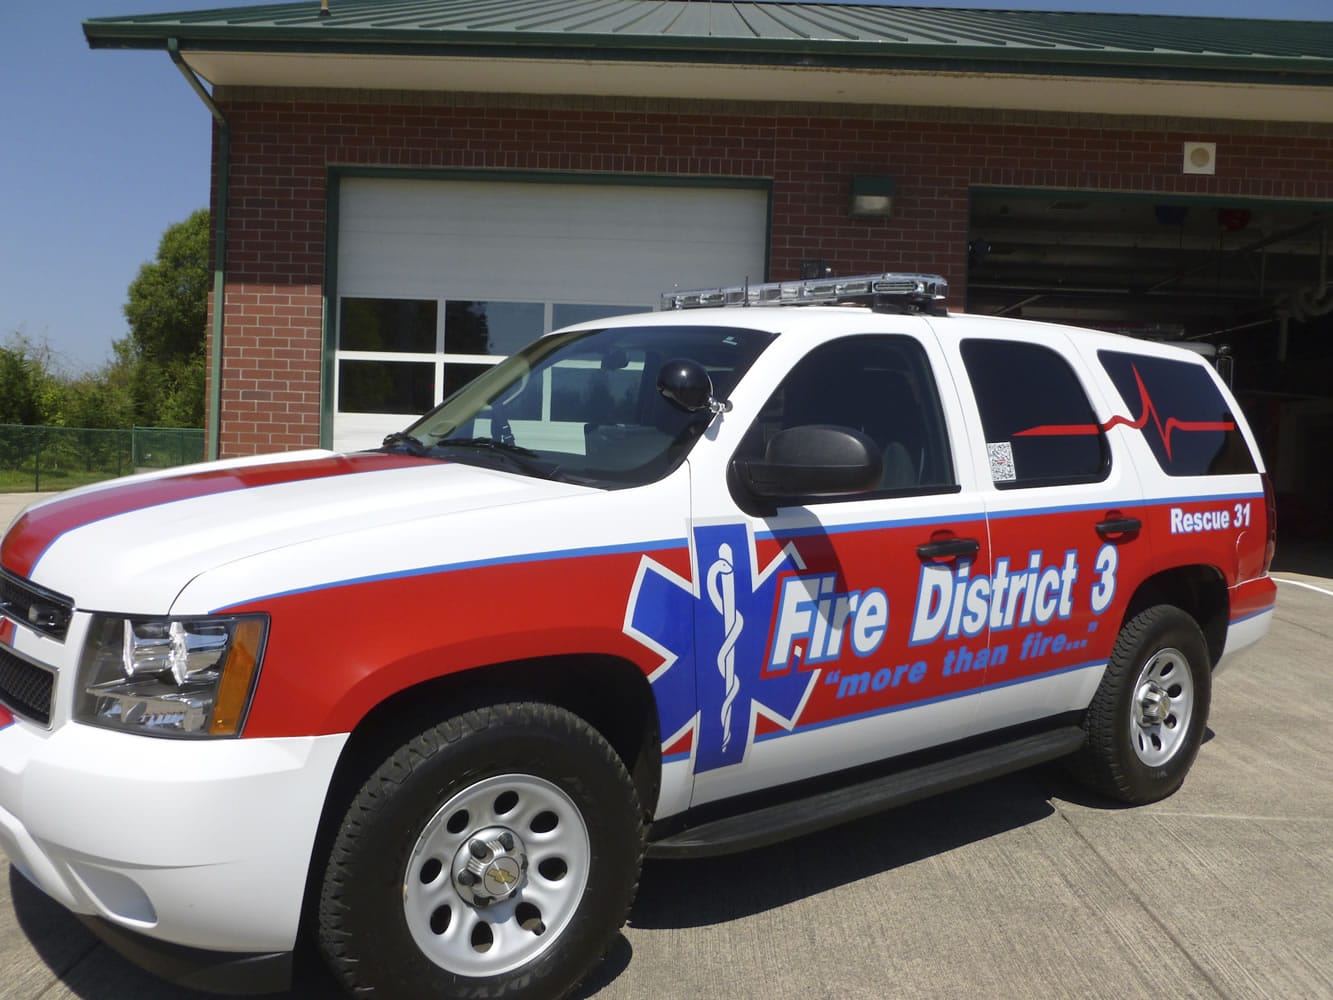 Fire District 3's Rescue 31 Chevy Tahoe is equipped with emergency lights, radios and reflective tape that can be seen at night.